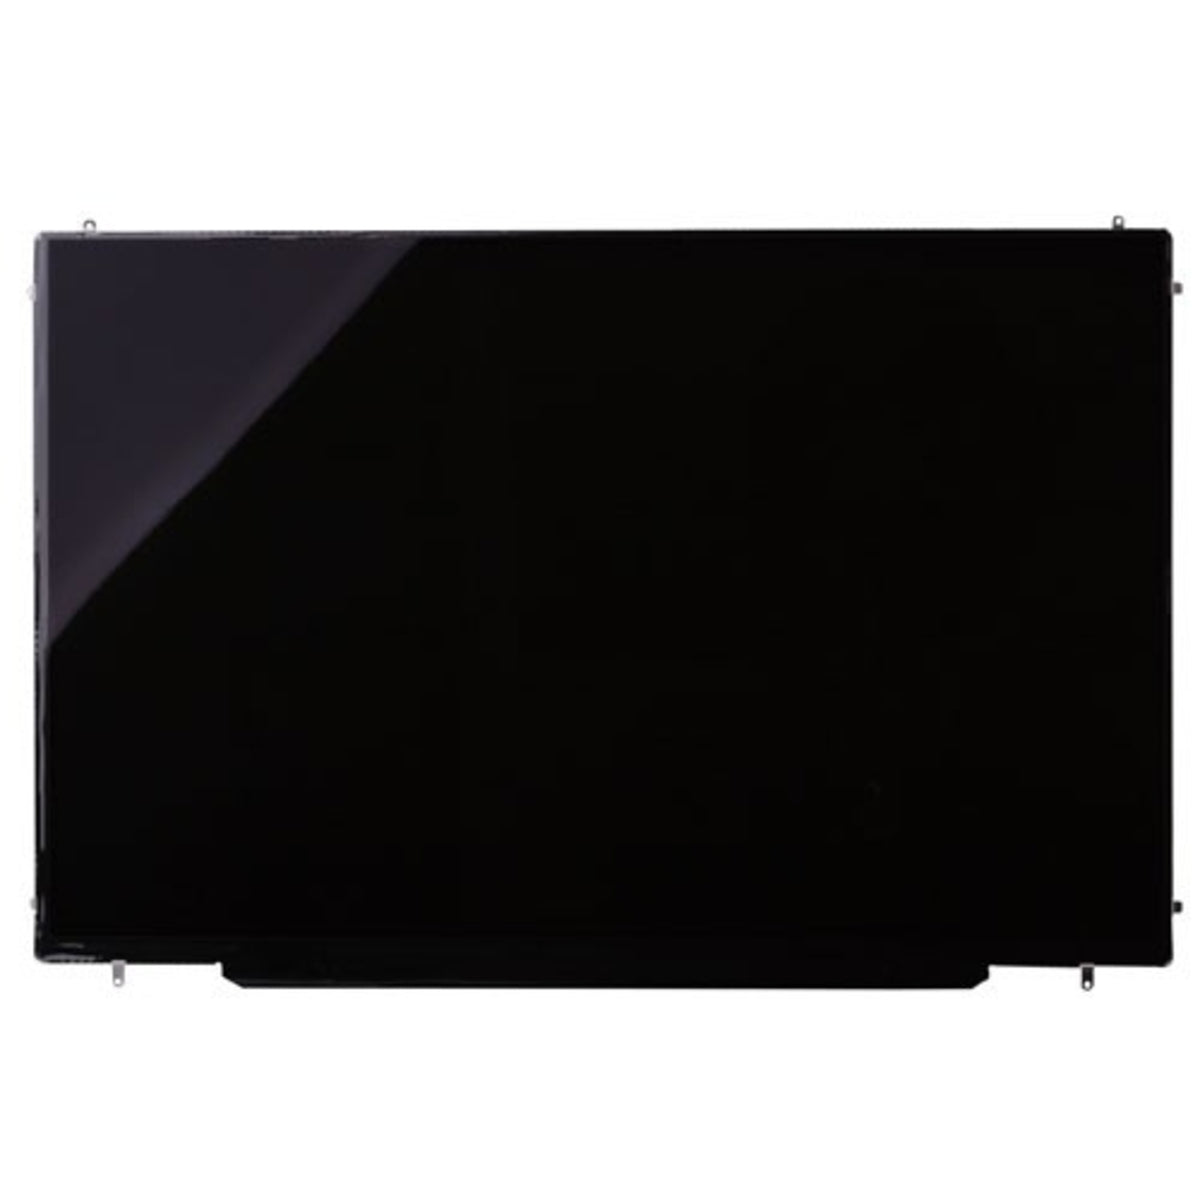 New LCD Screen LTN170CT10-G01 For Apple MacBook Pro Retina 17" A1297 EARLY 2009-LATE 2011 LCD Only